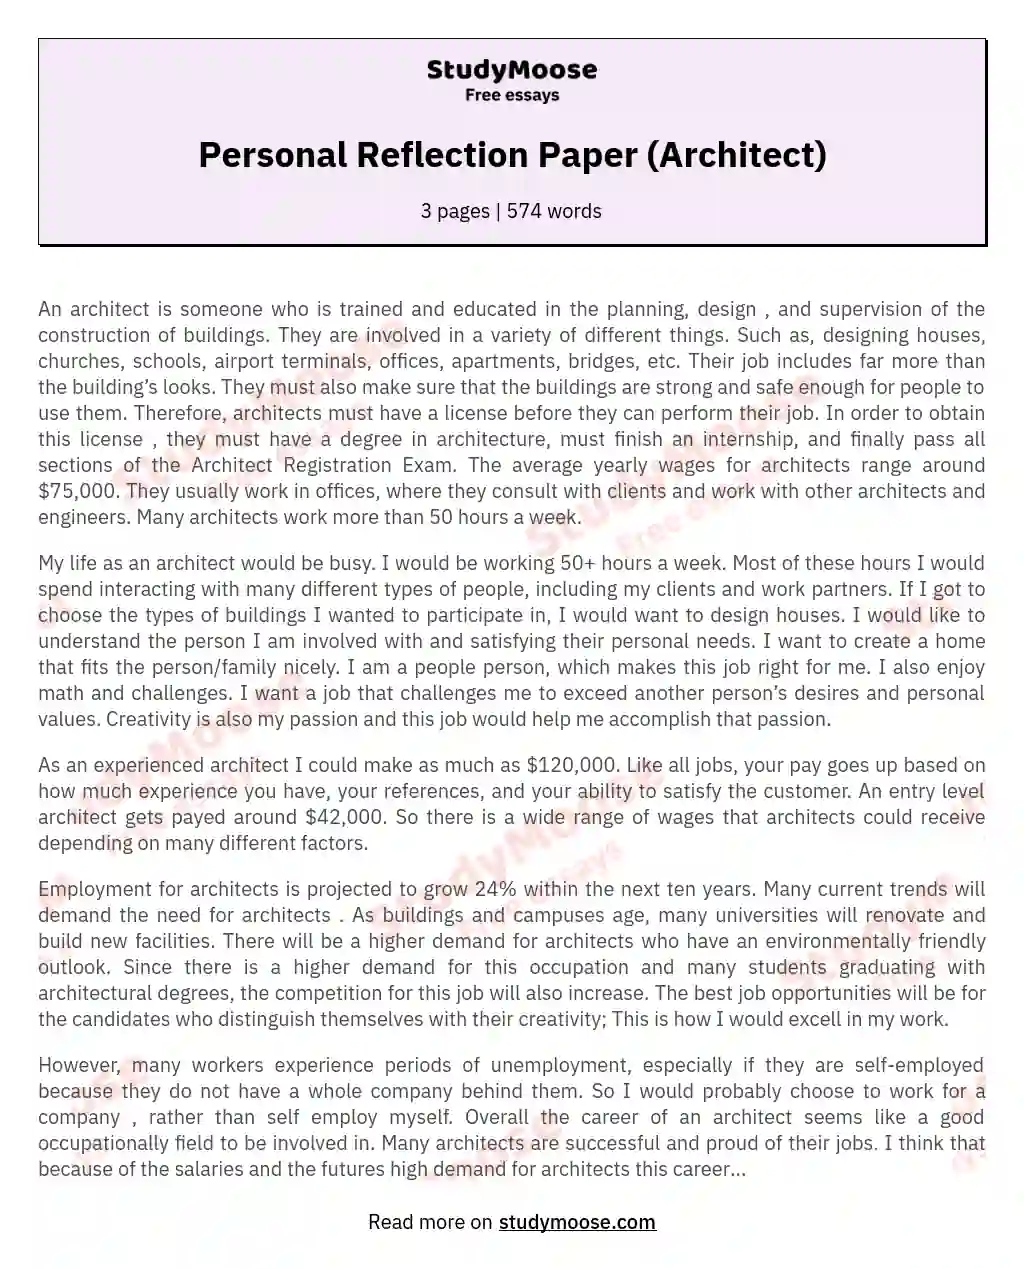 Personal Reflection Paper (Architect) essay